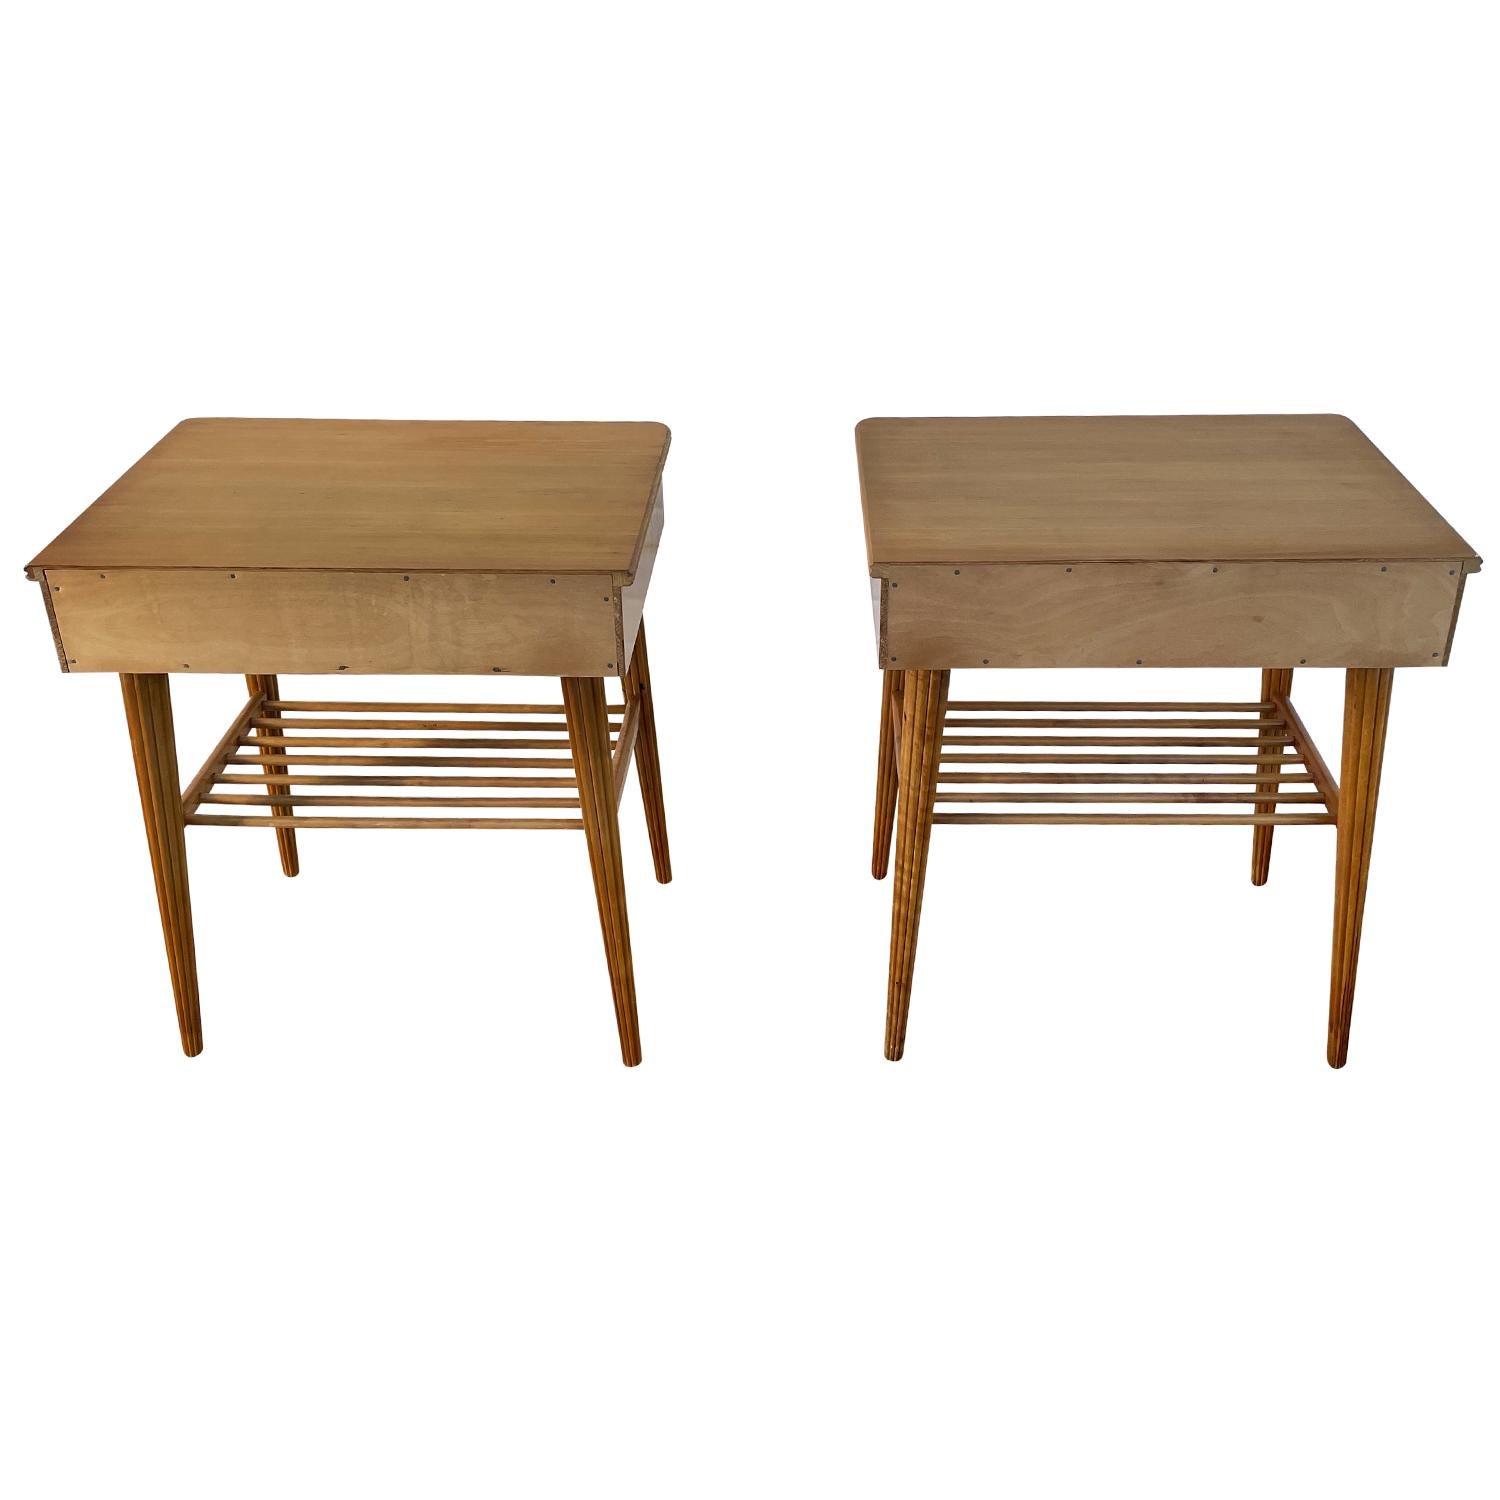 20th Century Danish Pair of Birchwood Nightstands - Vintage Brass Bedside Tables For Sale 2